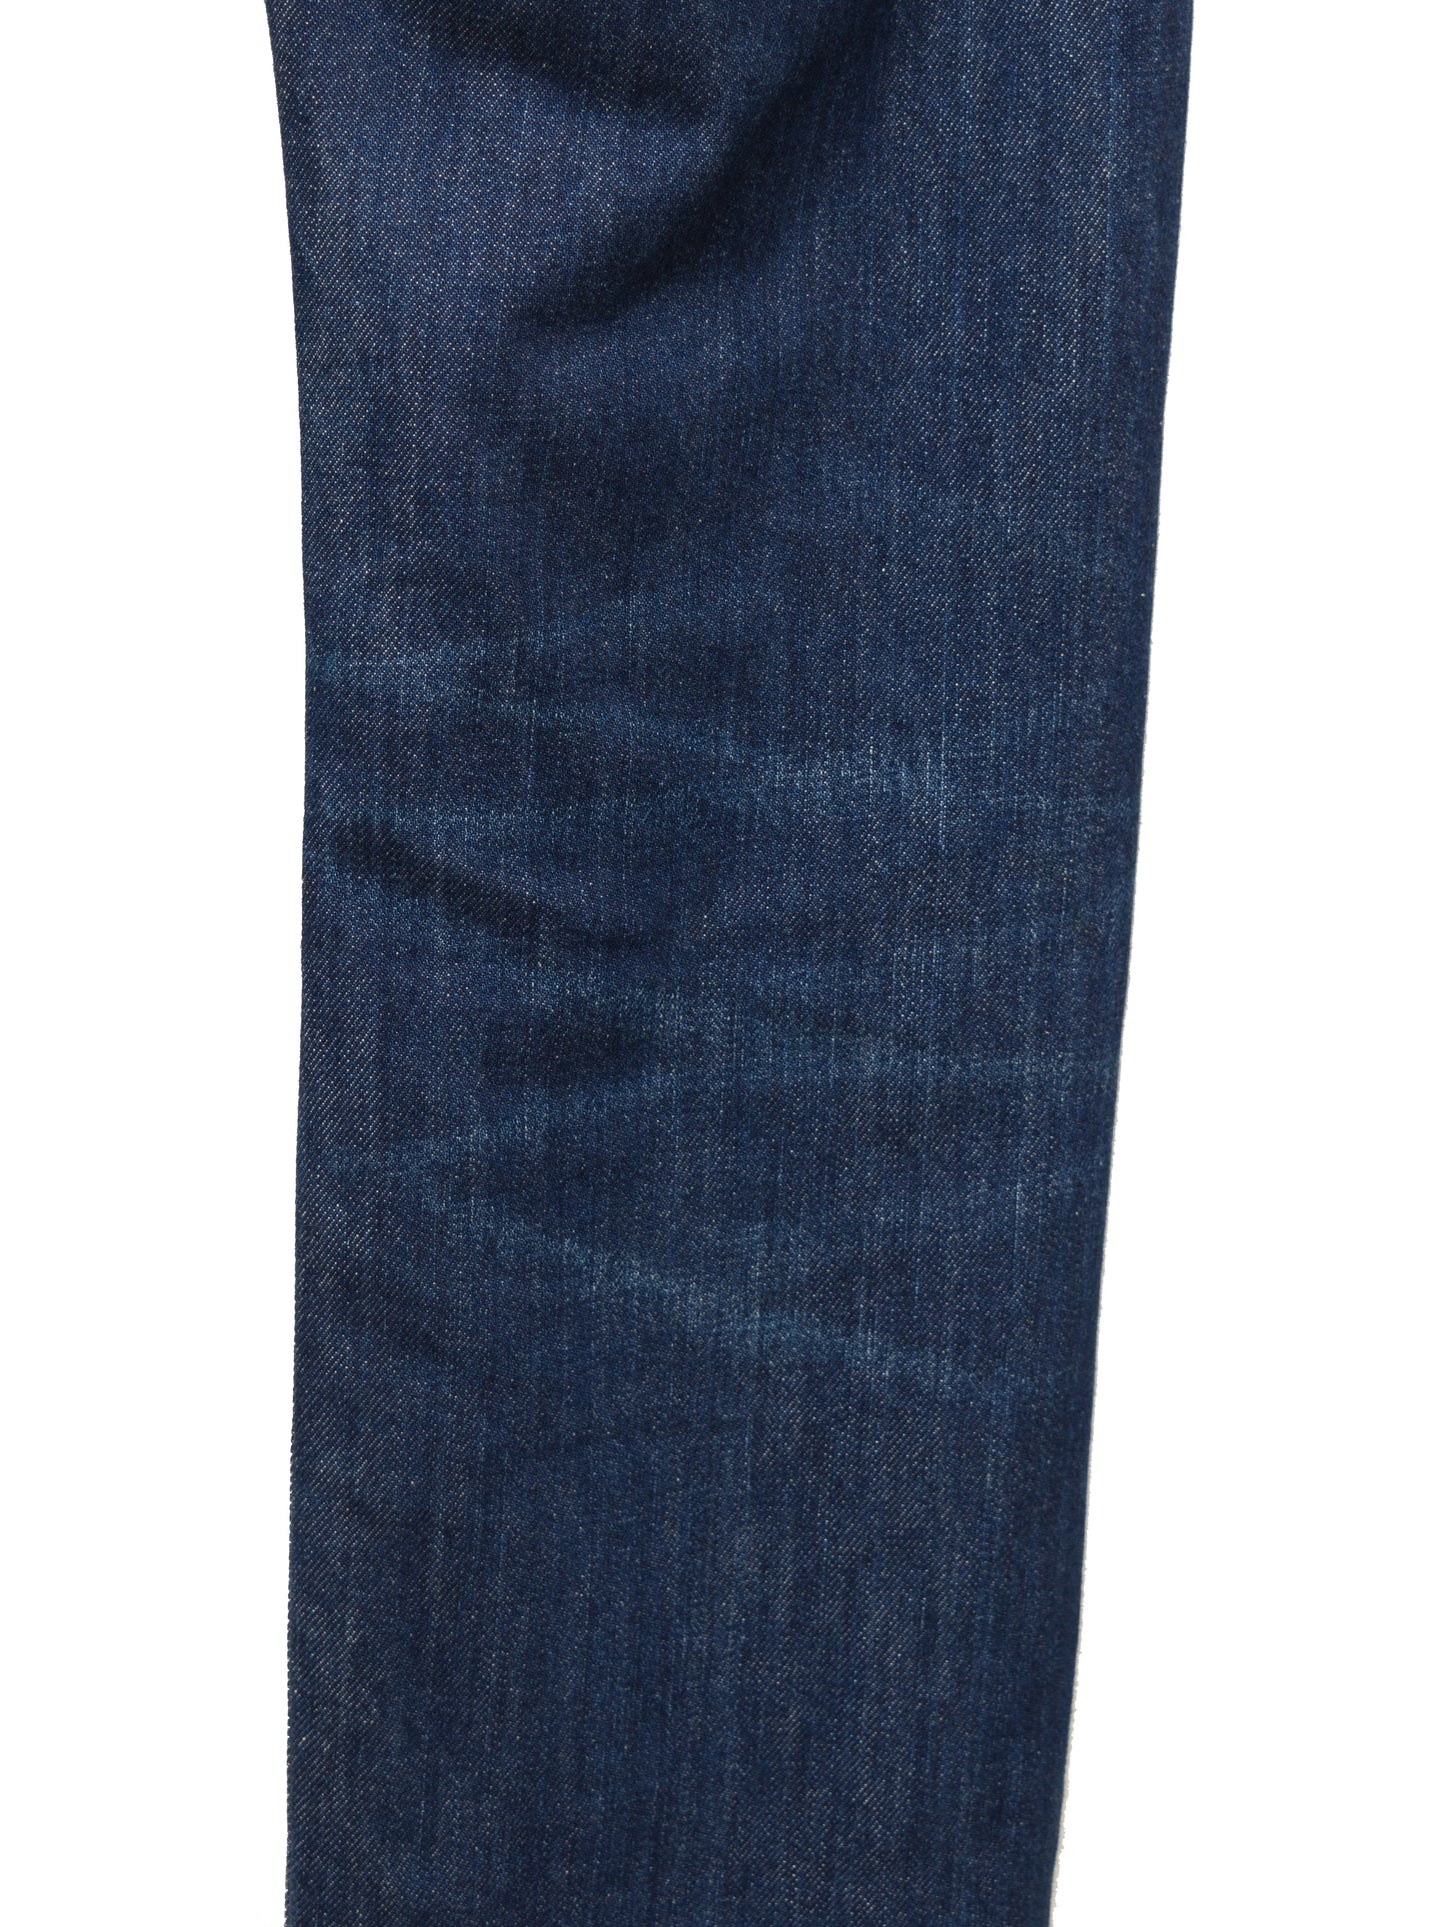 spotted horse jeans magic wash ∙ cotton ∙ 30